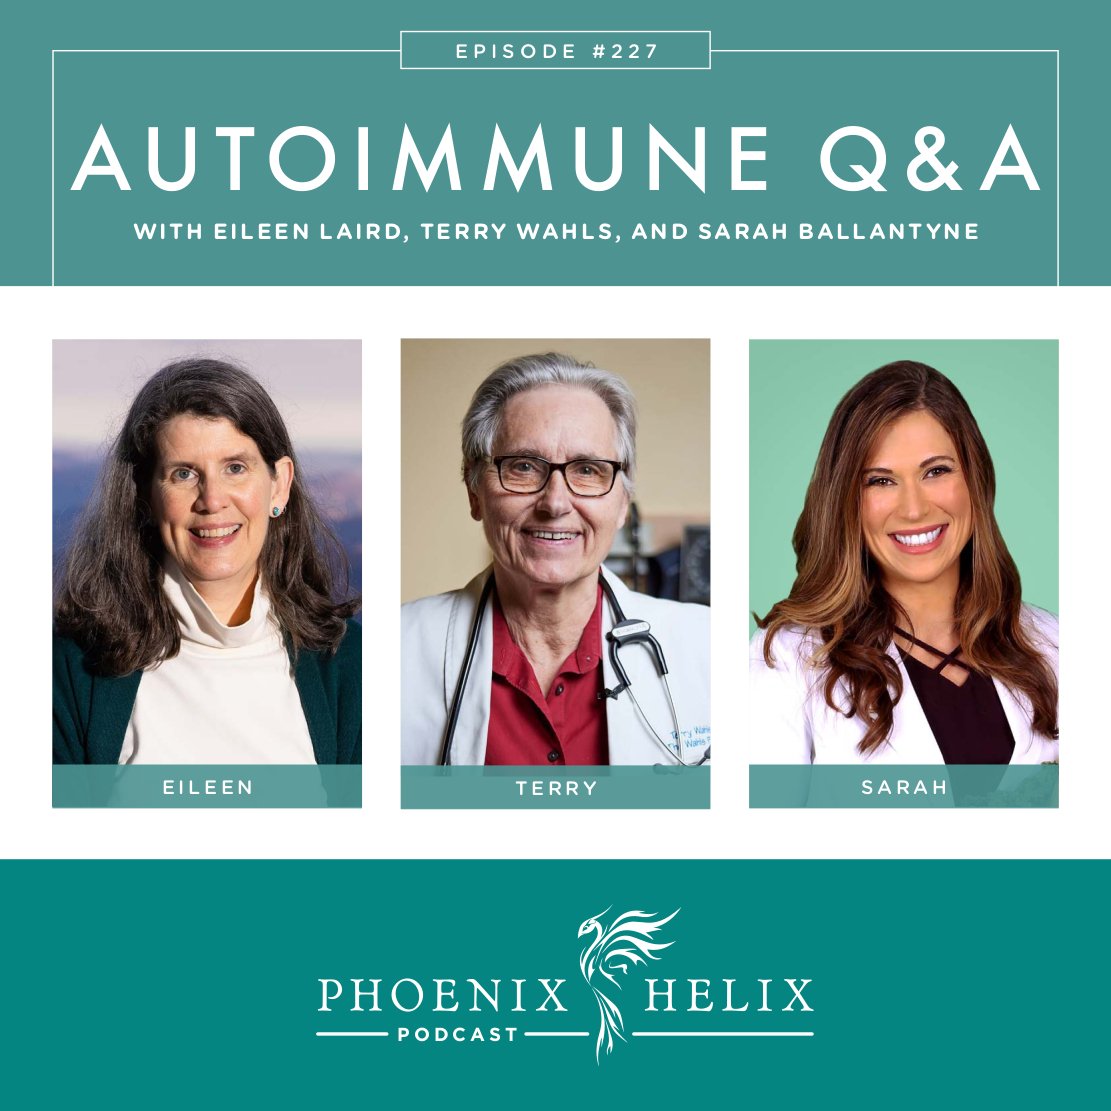 Autoimmune Q&A with Terry, Sarah, and Eileen | Phoenix Helix Podcast